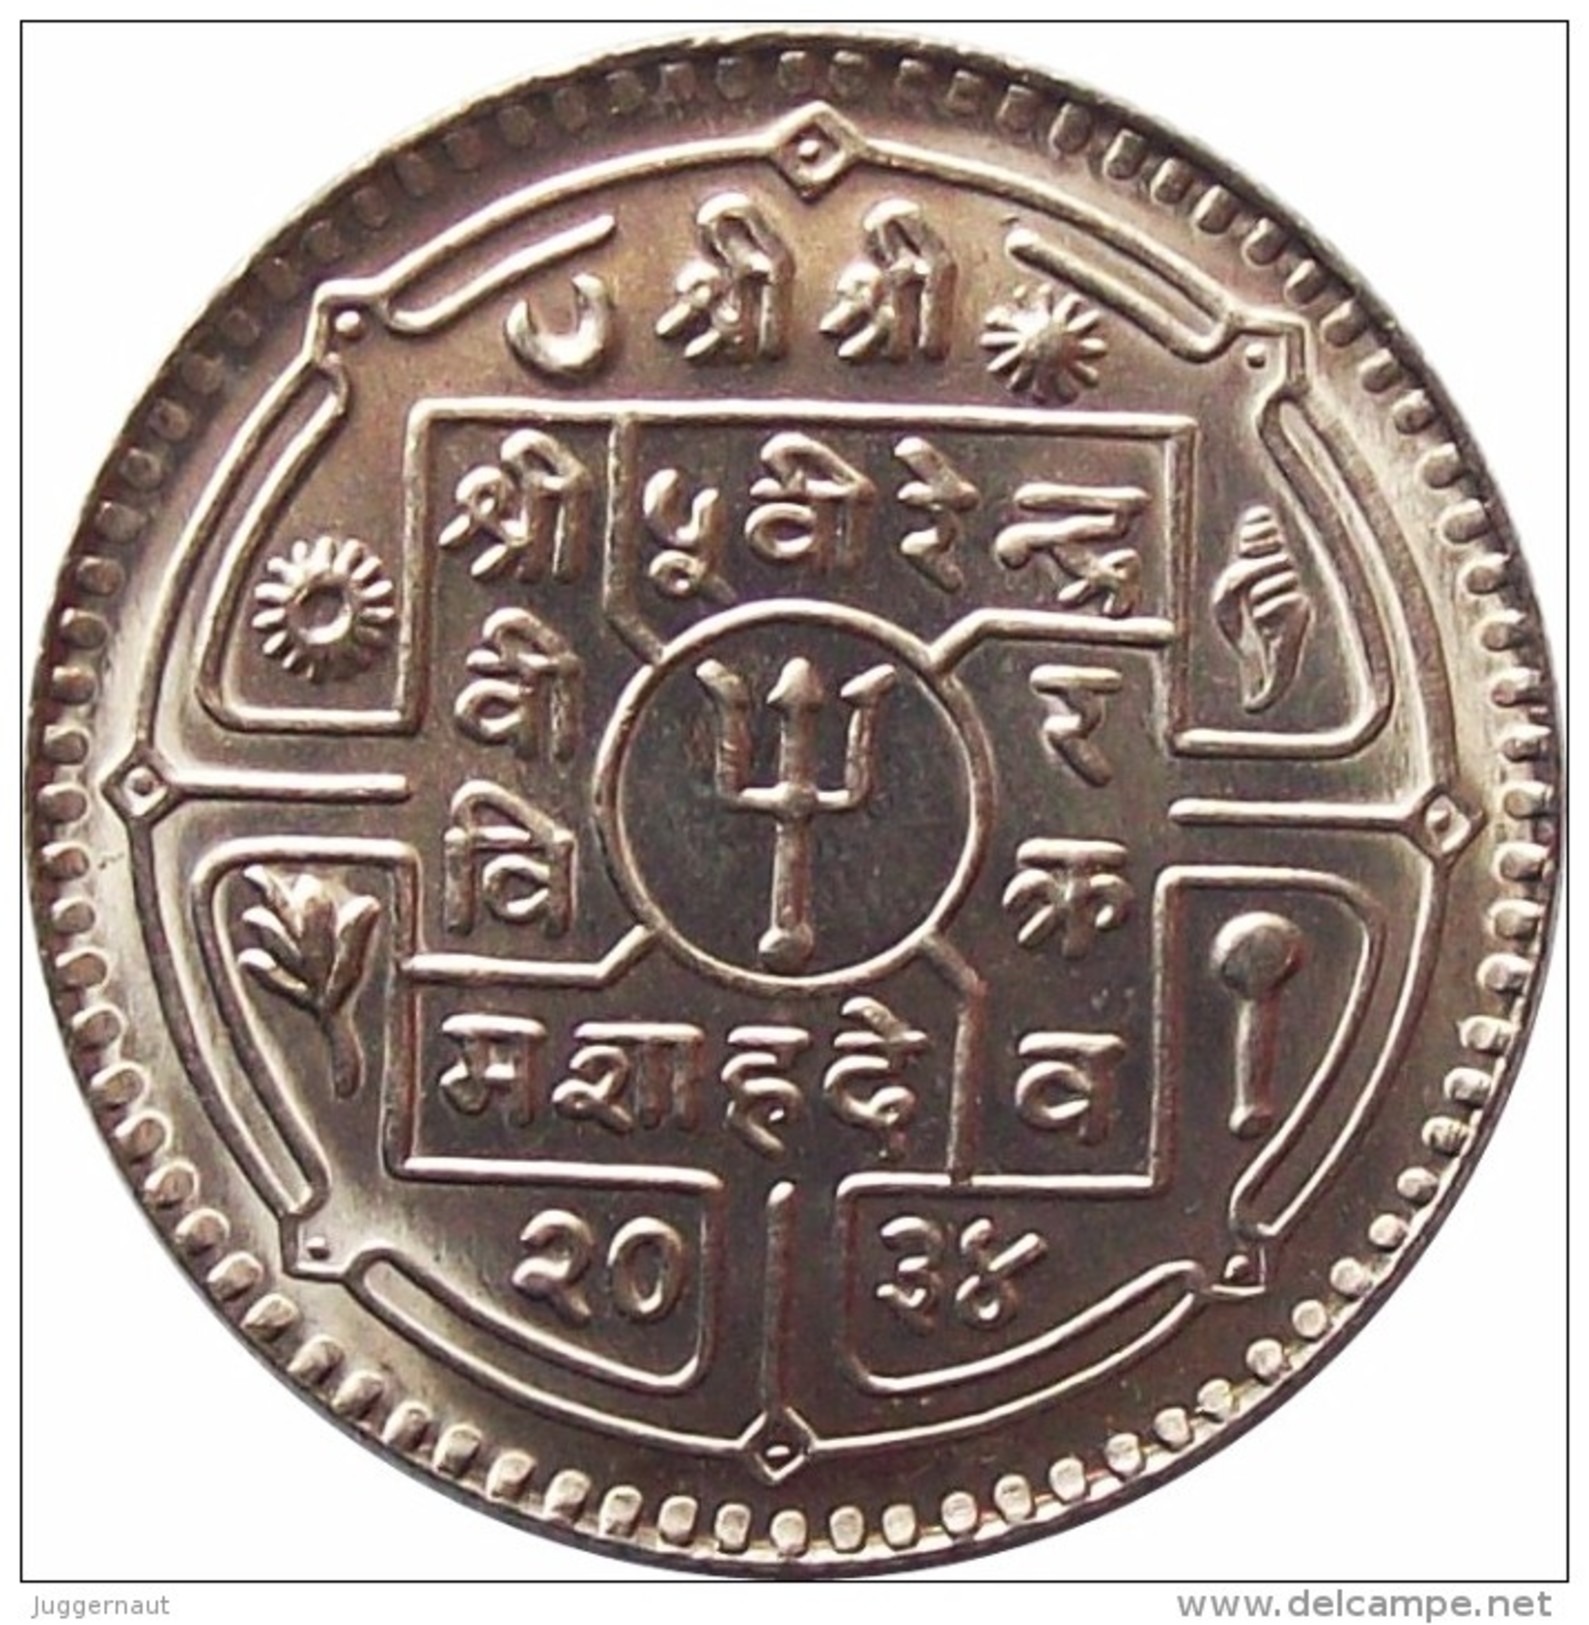 NEPAL ONE RUPEE COPPER-NICKEL COIN KING BIRENDRA 1979 AD KM-828a UNC UNCIRCULATED - Nepal